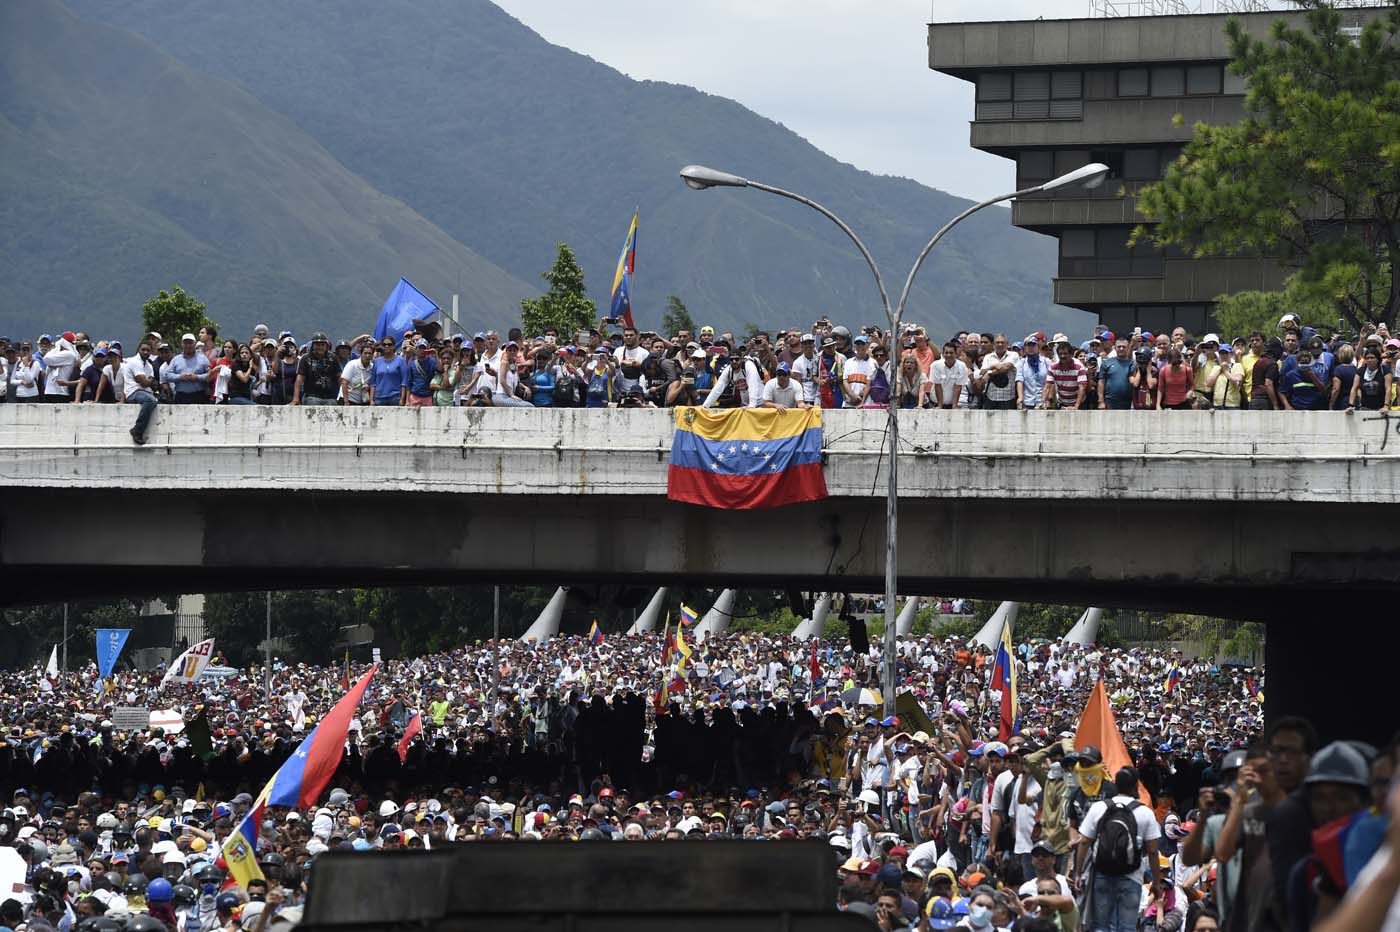 Demonstrators clash with riot police as they march along a major highway of Caracas during a protest against Venezuelan President Nicolas Maduro, on May 3, 2017. Venezuela's angry opposition rallied Wednesday vowing huge street protests against President Nicolas Maduro's plan to rewrite the constitution and accusing him of dodging elections to cling to power despite deadly unrest. / AFP PHOTO / JUAN BARRETO